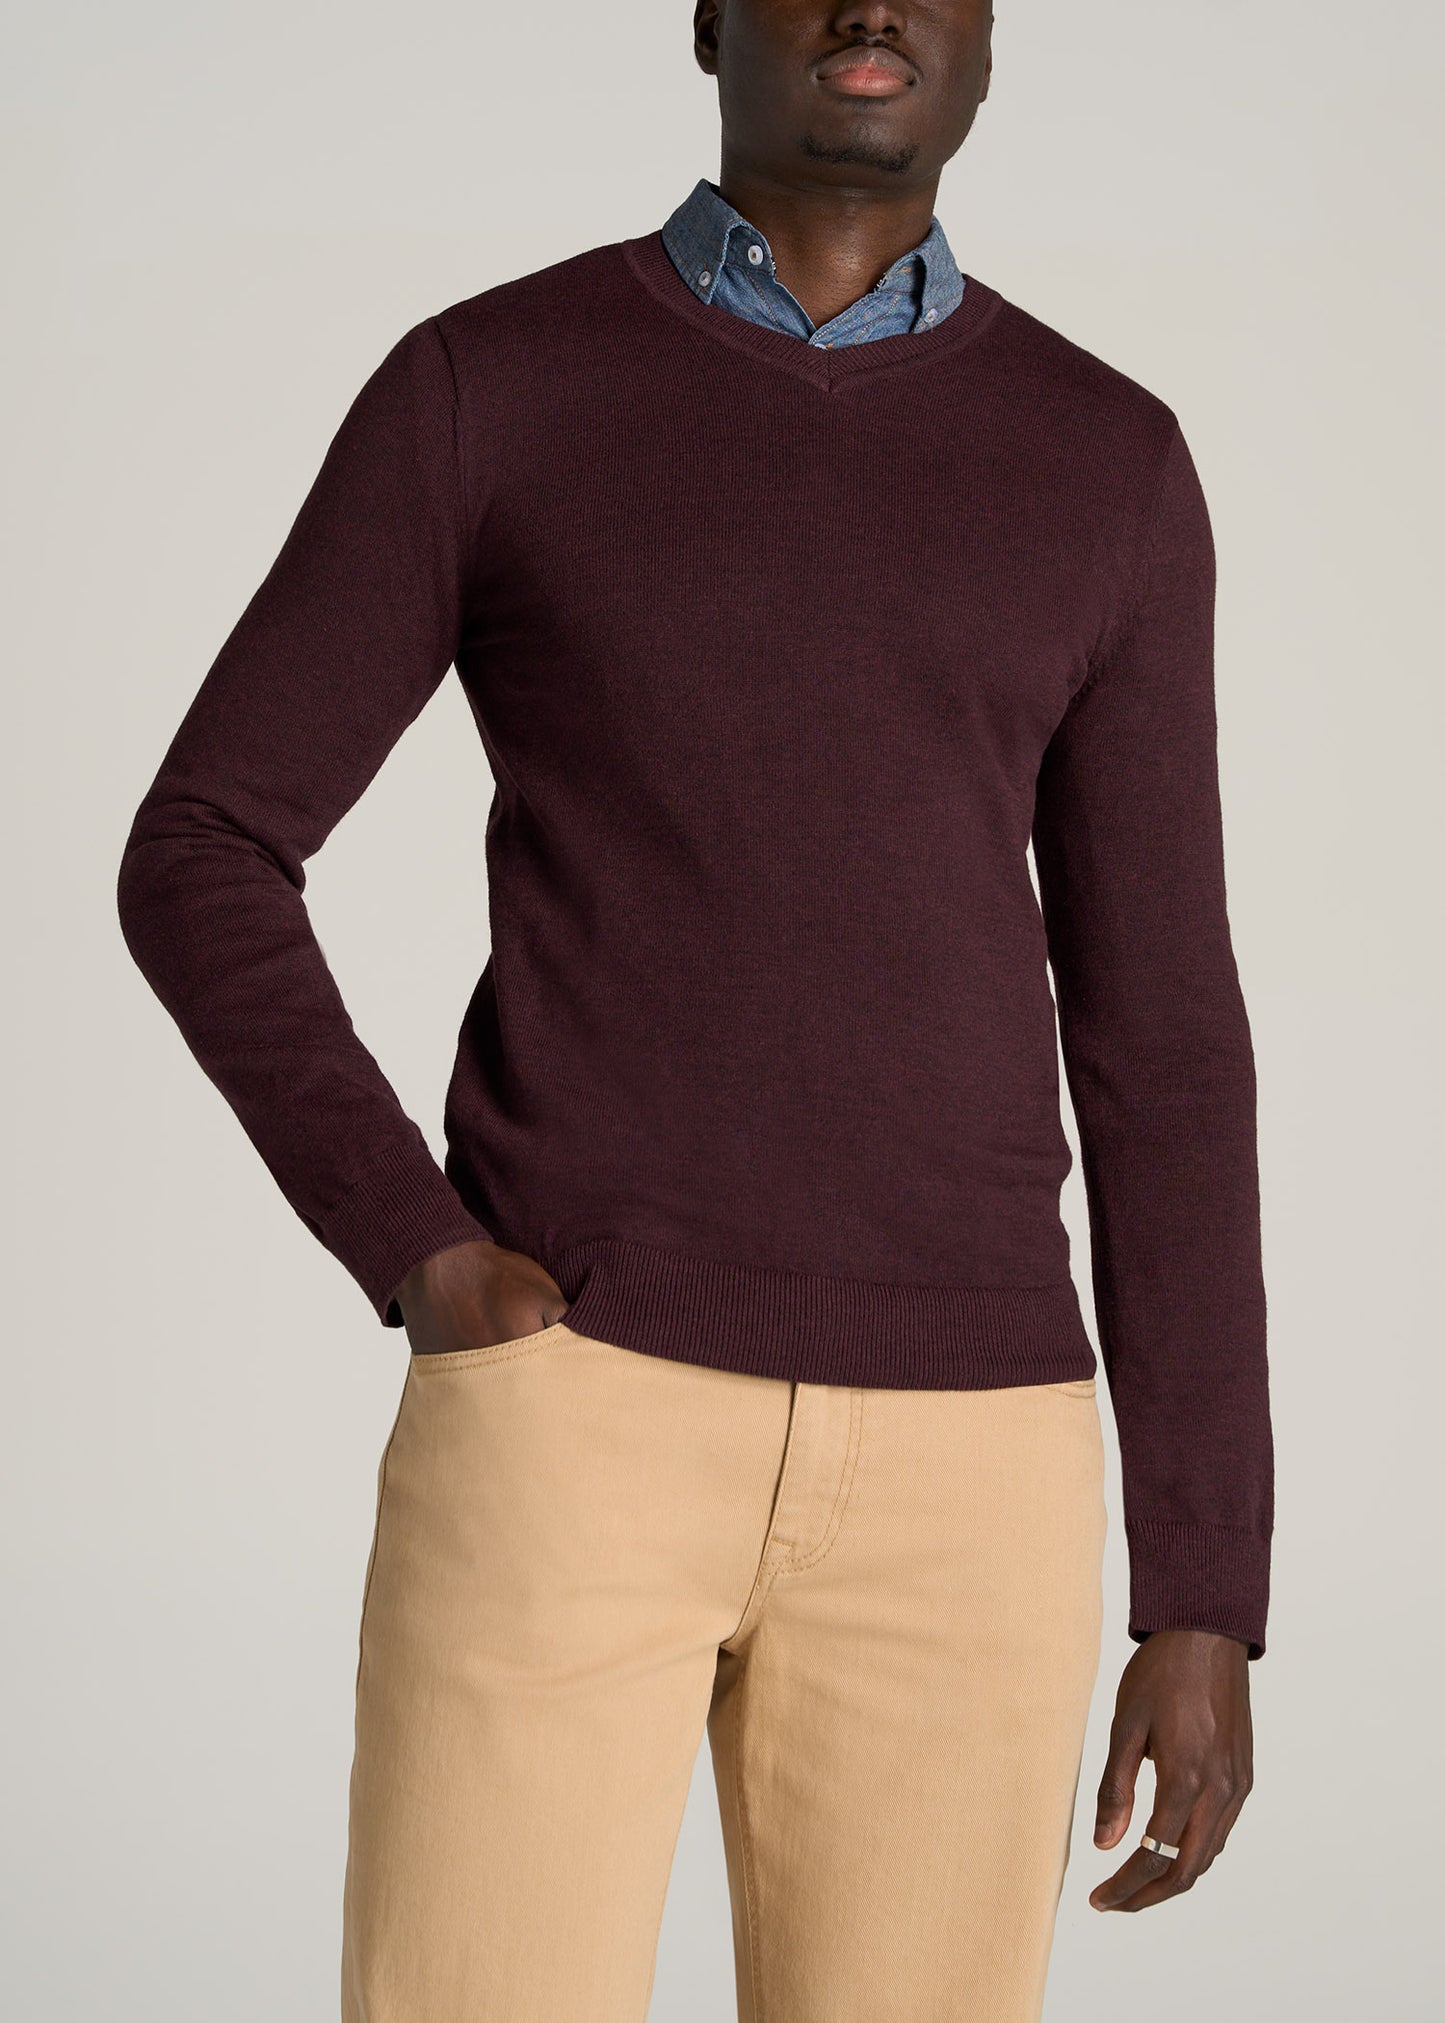    American-Tall-Men-Everyday-V-Neck-Sweater-Burgundy-Mix-front